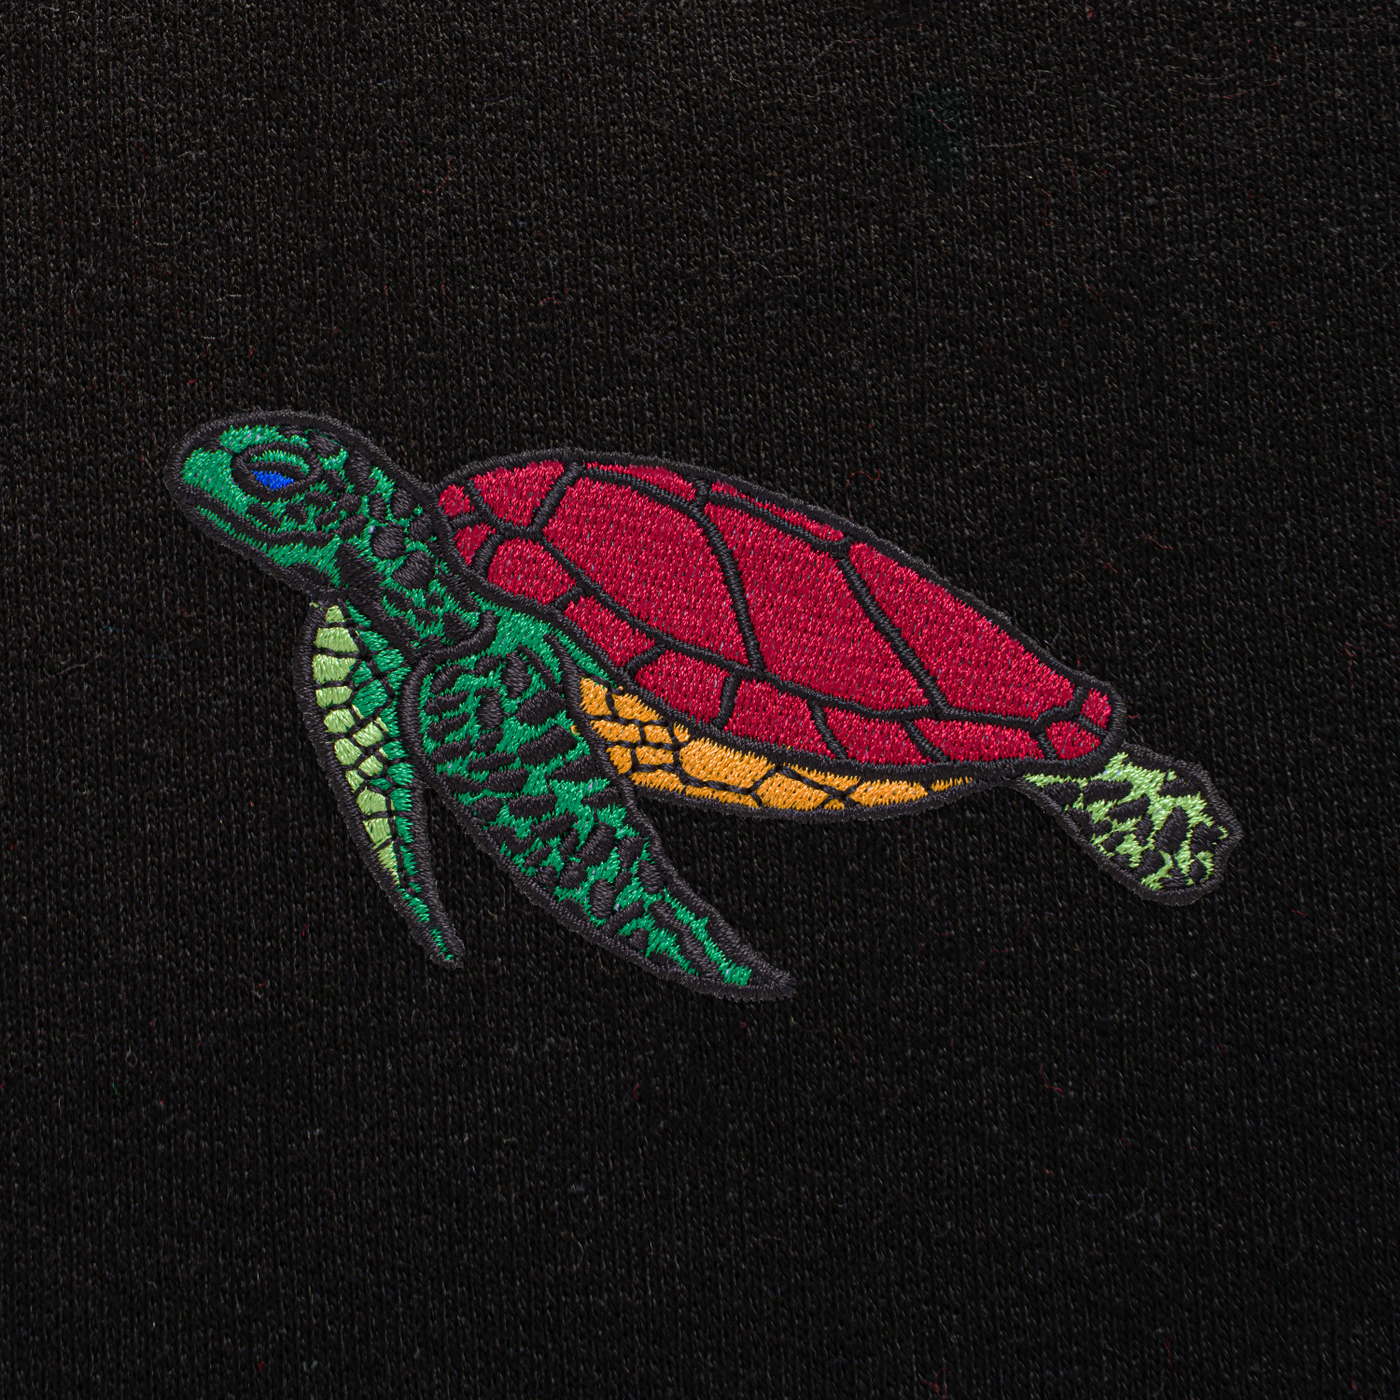 Bobby's Planet Men's Embroidered Sea Turtle Sweatshirt from Seven Seas Fish Animals Collection in Black Color#color_black